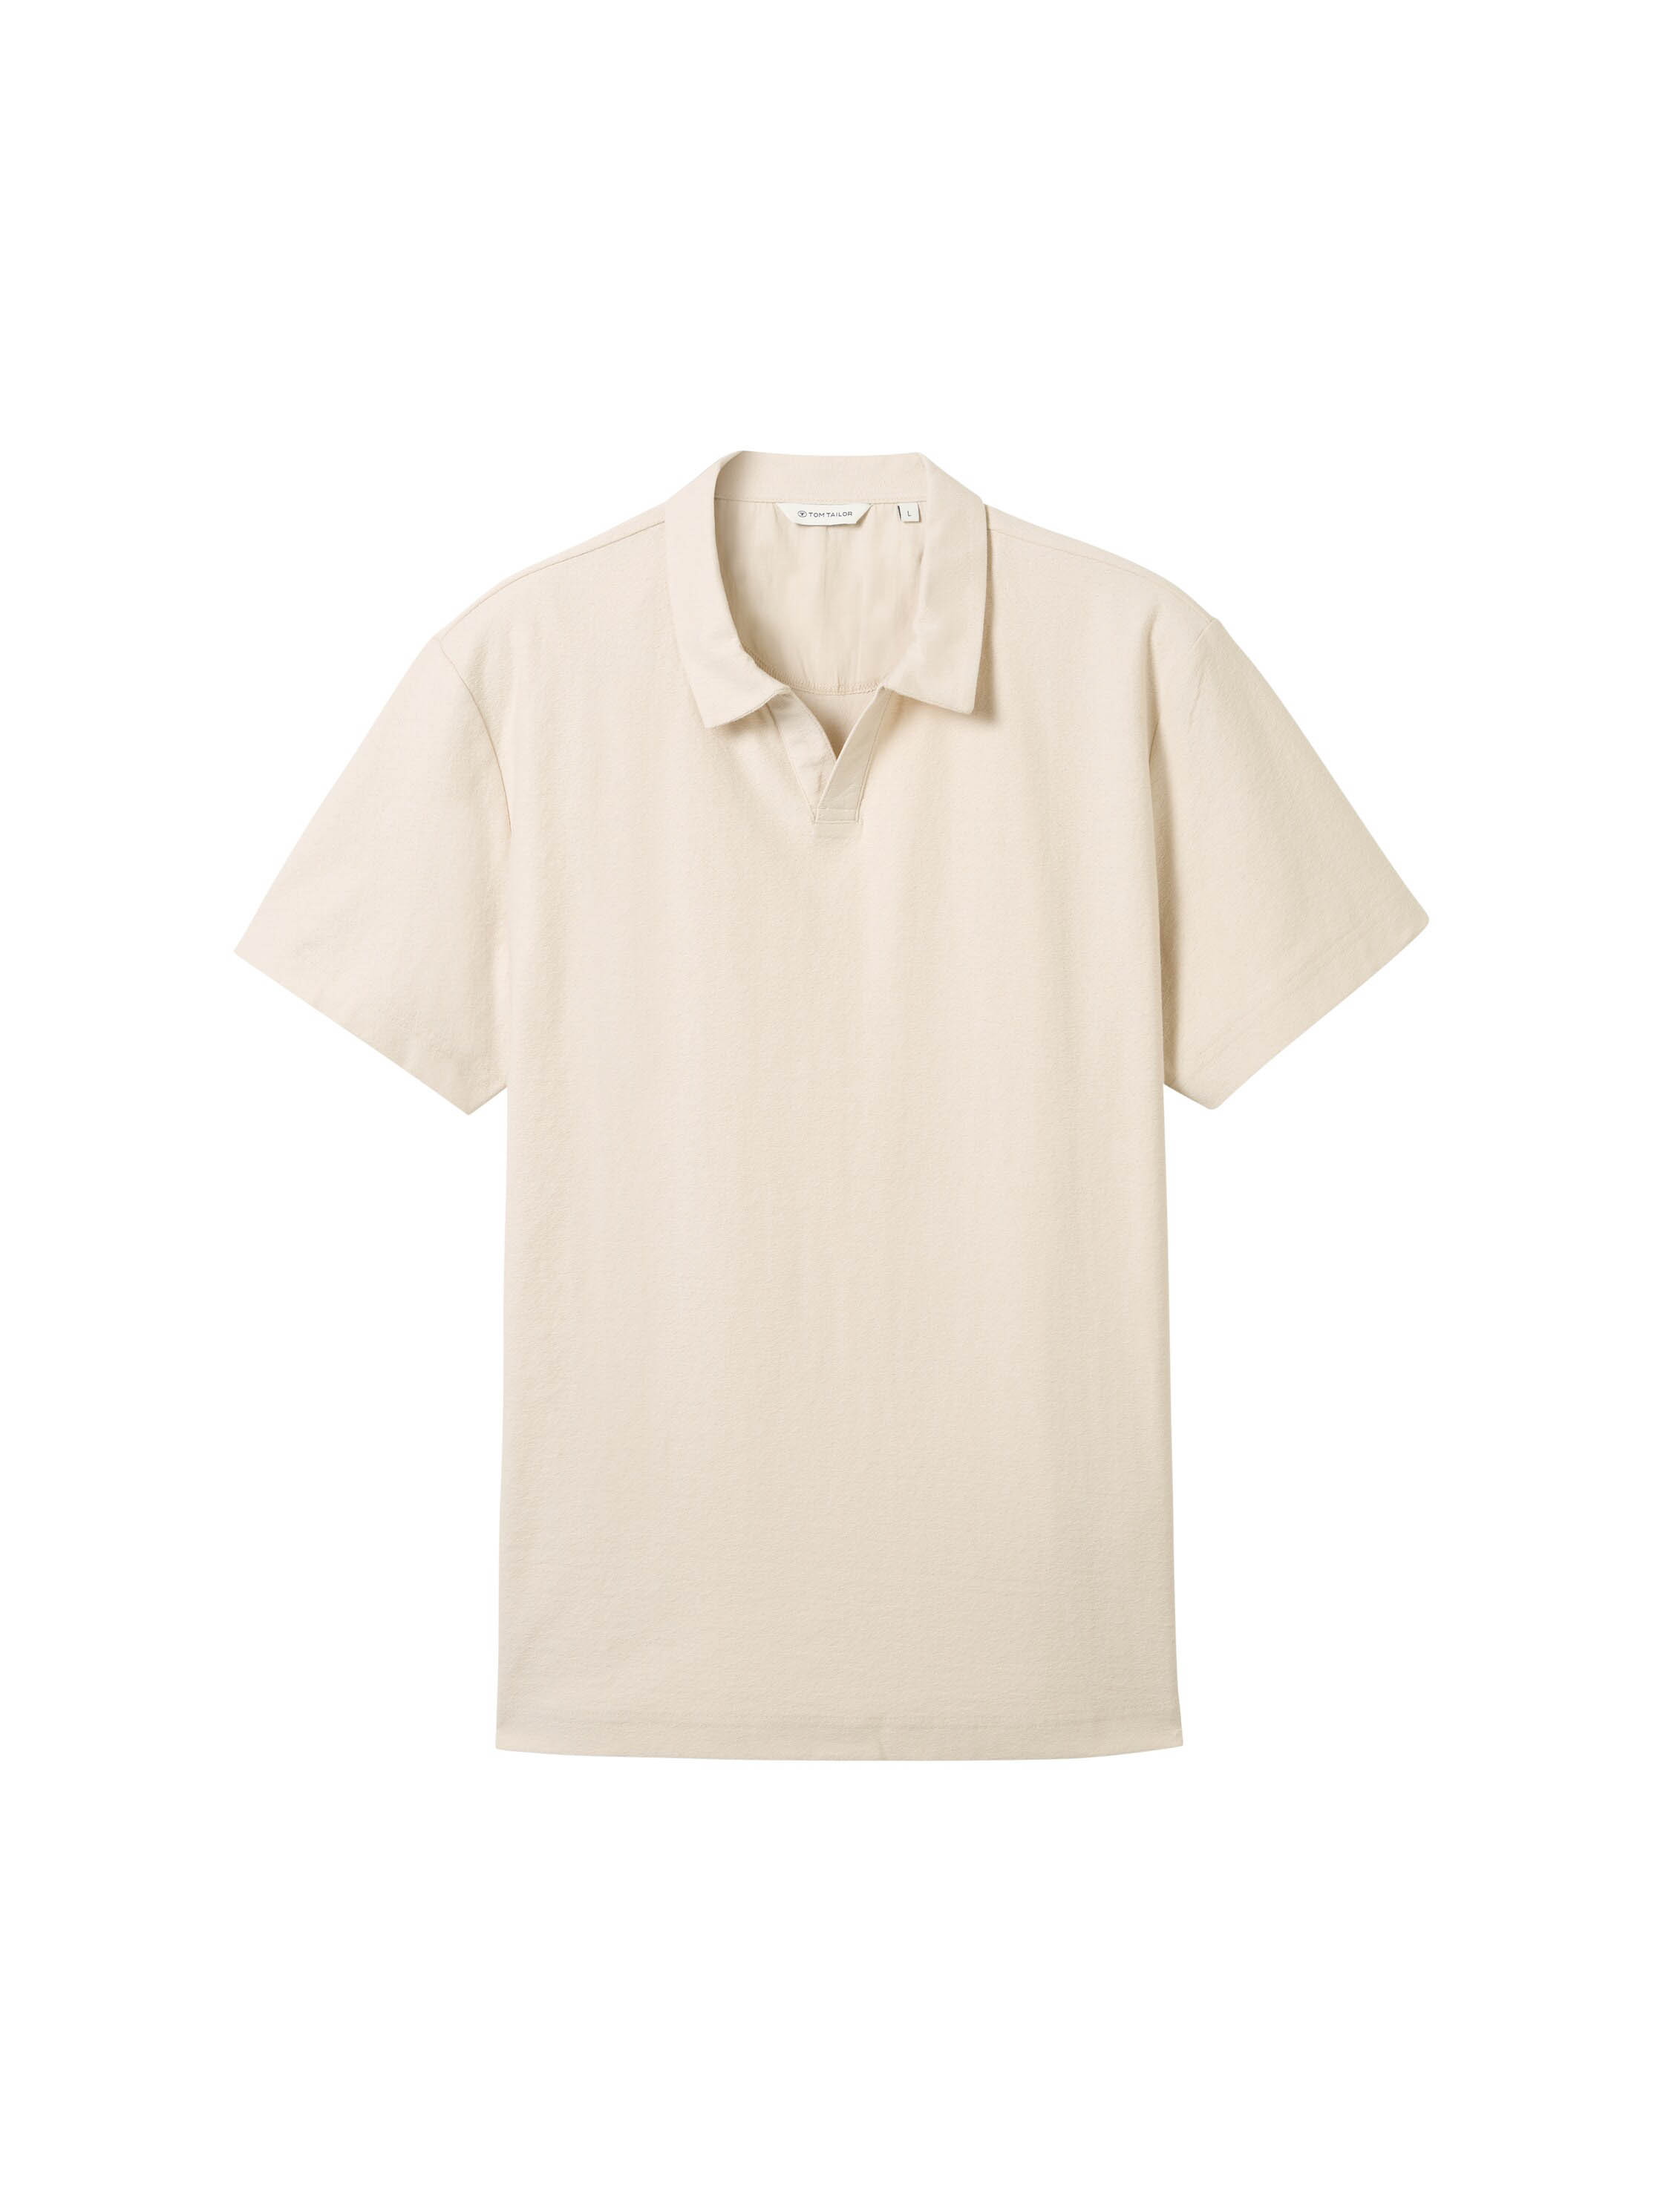 Tom tailor Structured Polo